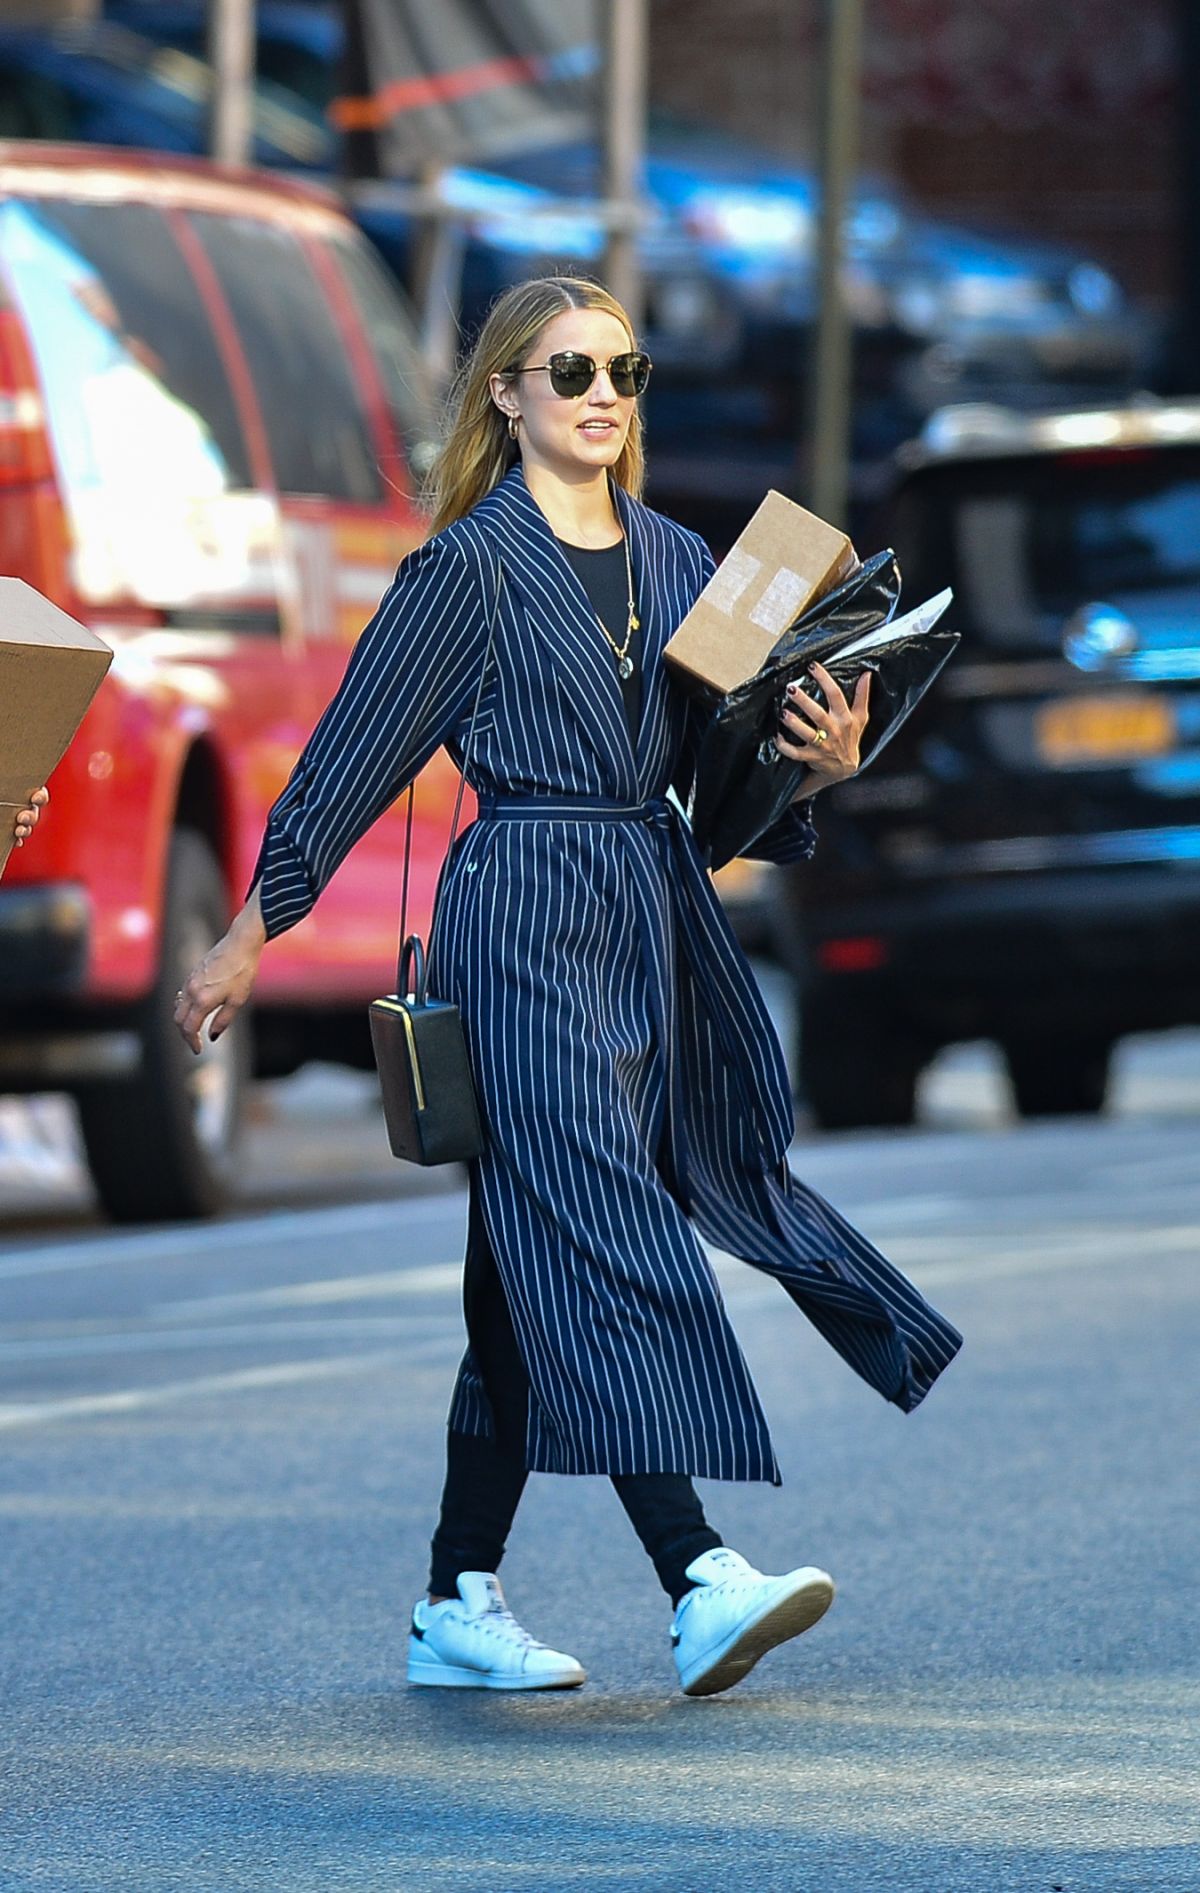 dianna-agron-and-winston-marshall-out-shopping-in-new-york-10-03-2017-1.jpg